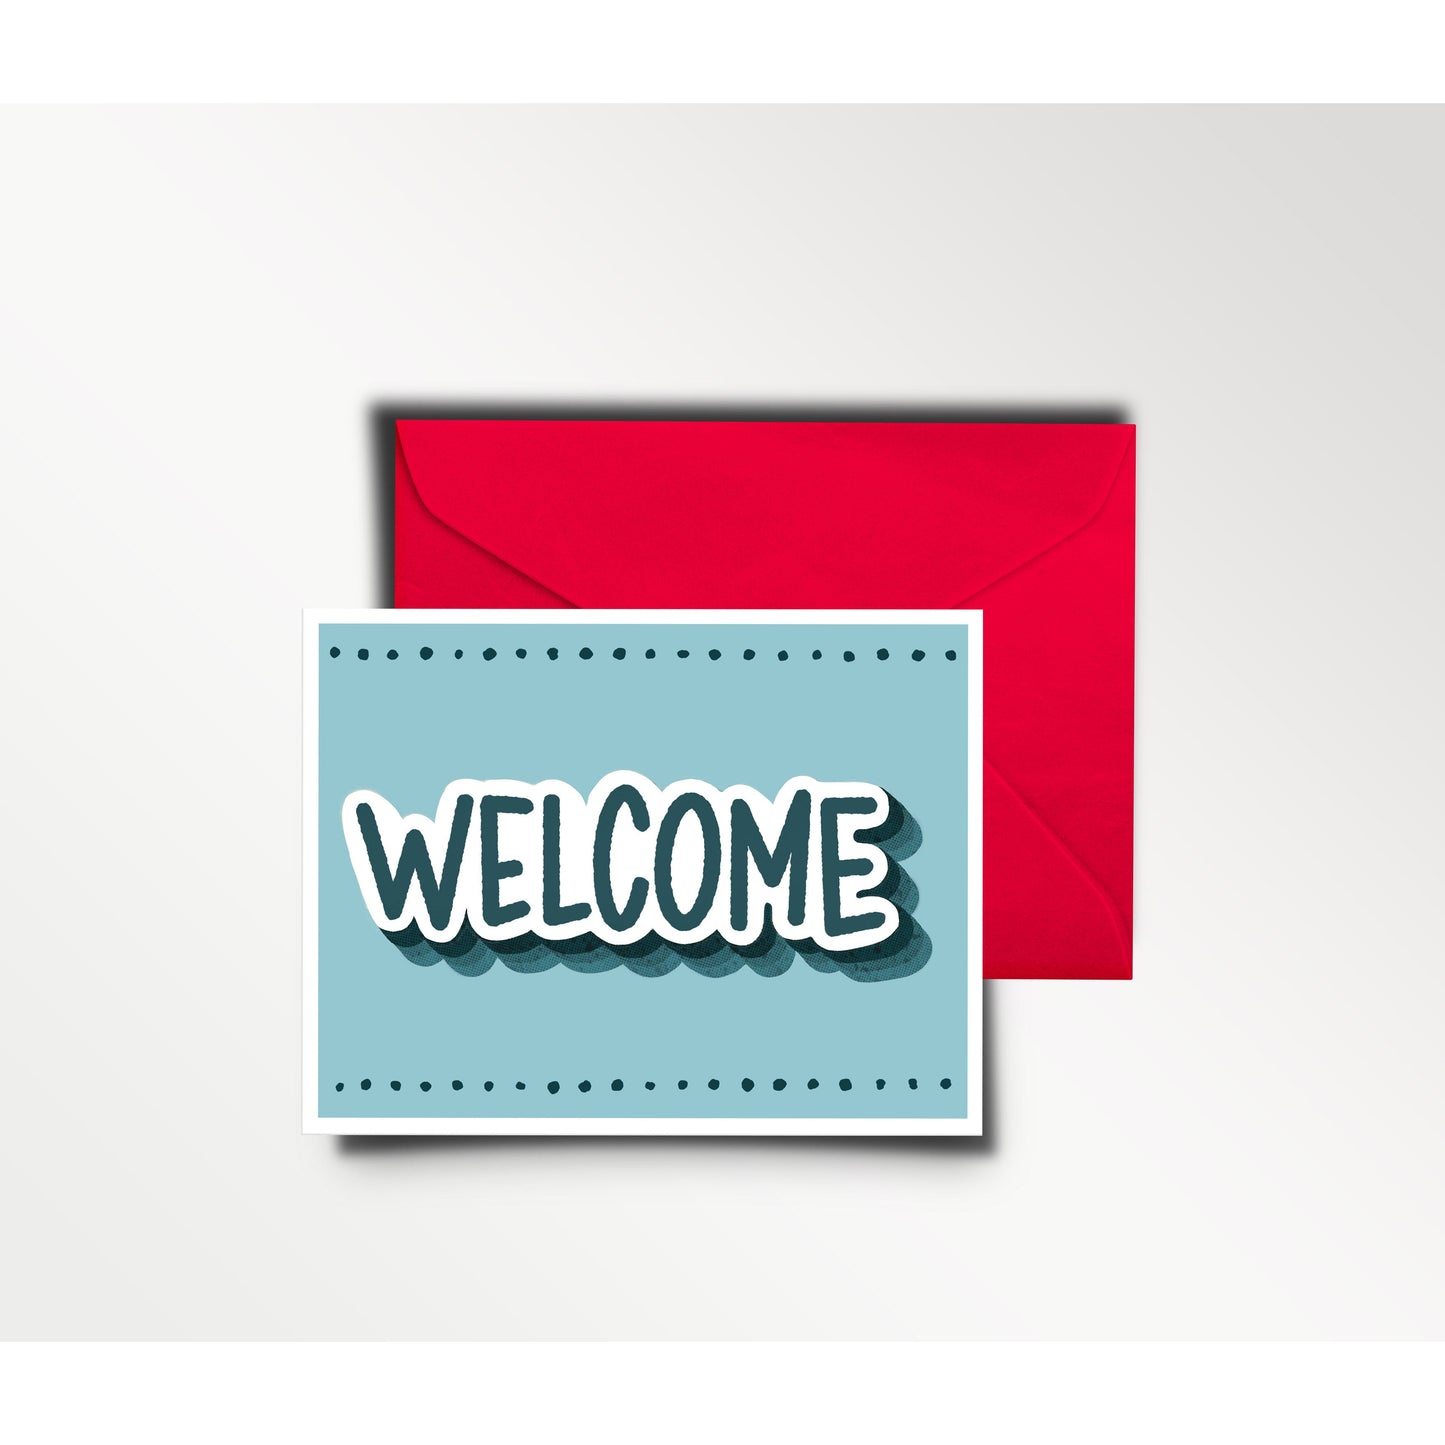 Welcome - Greeting Card | New Neighbor, New Employee, New Co-Worker, Guest Speaker